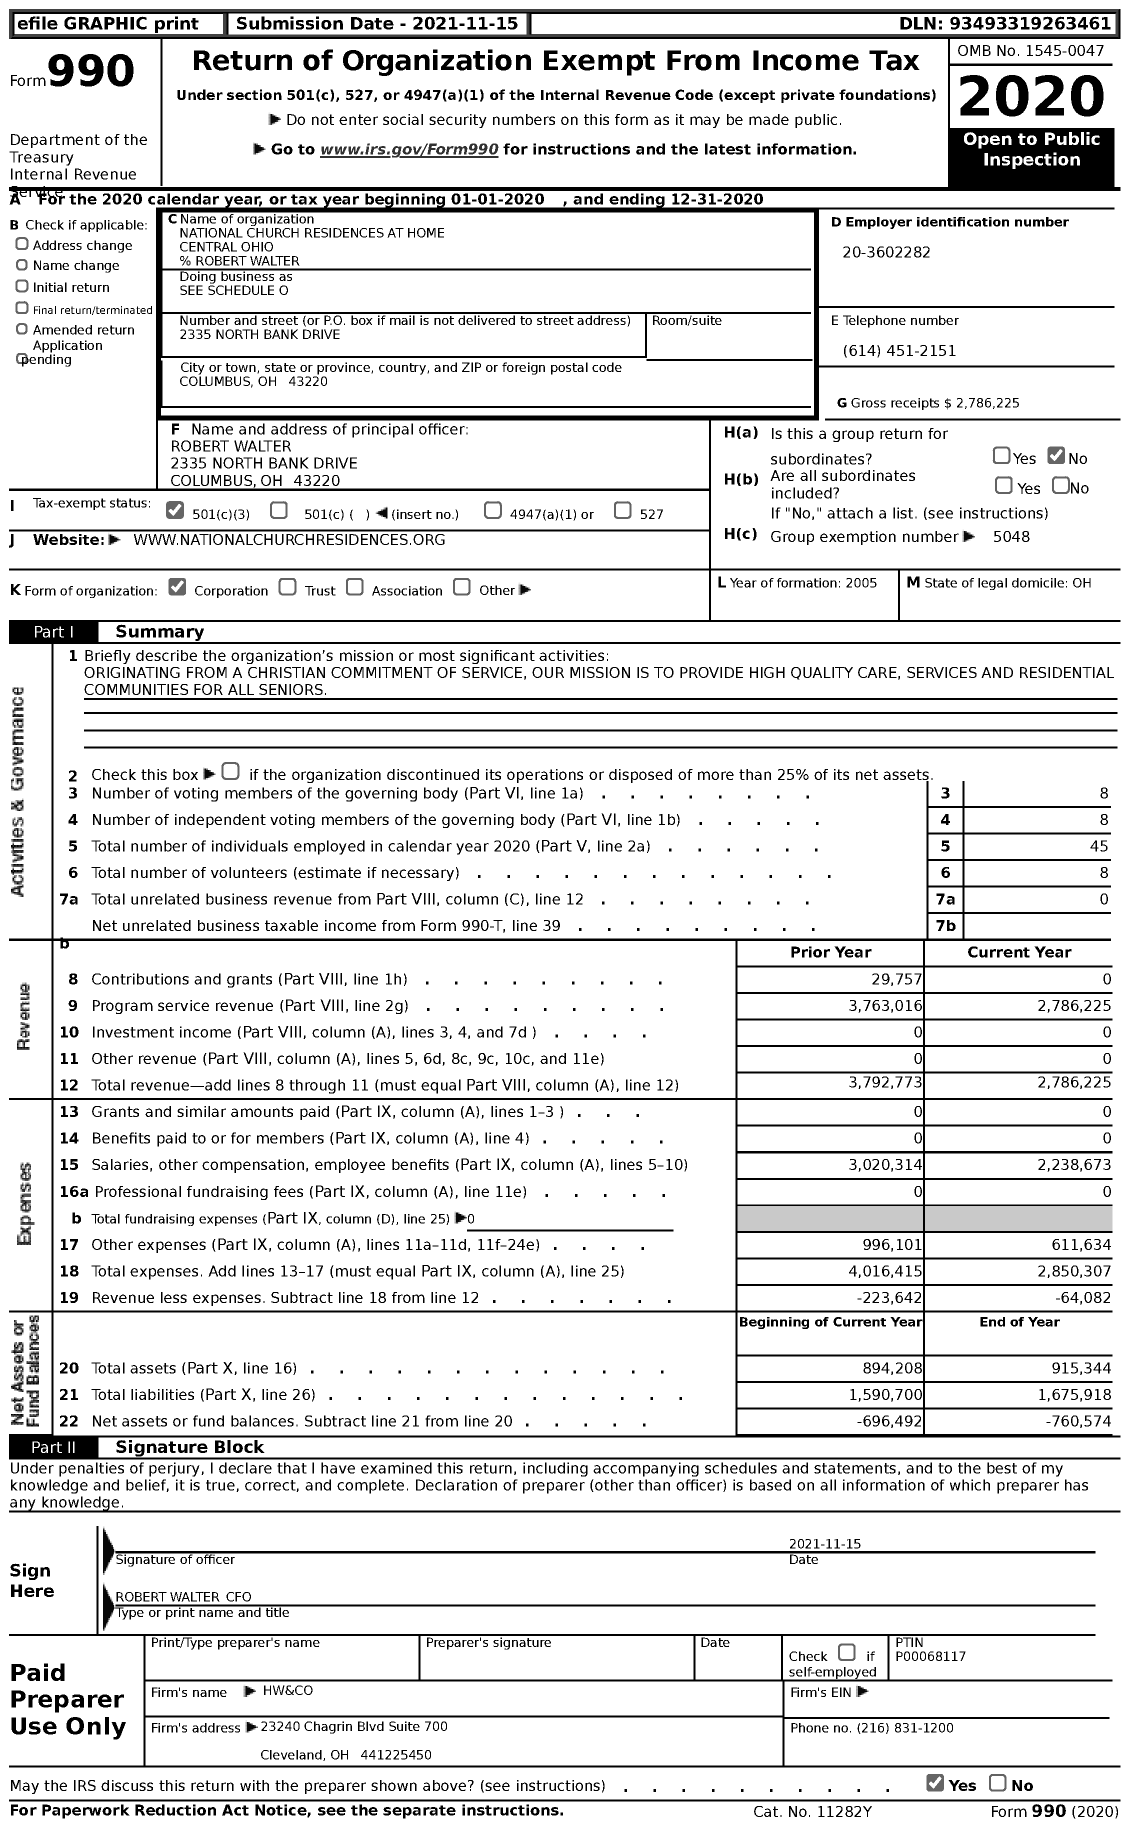 Image of first page of 2020 Form 990 for National Church Residences at Home Central Ohio